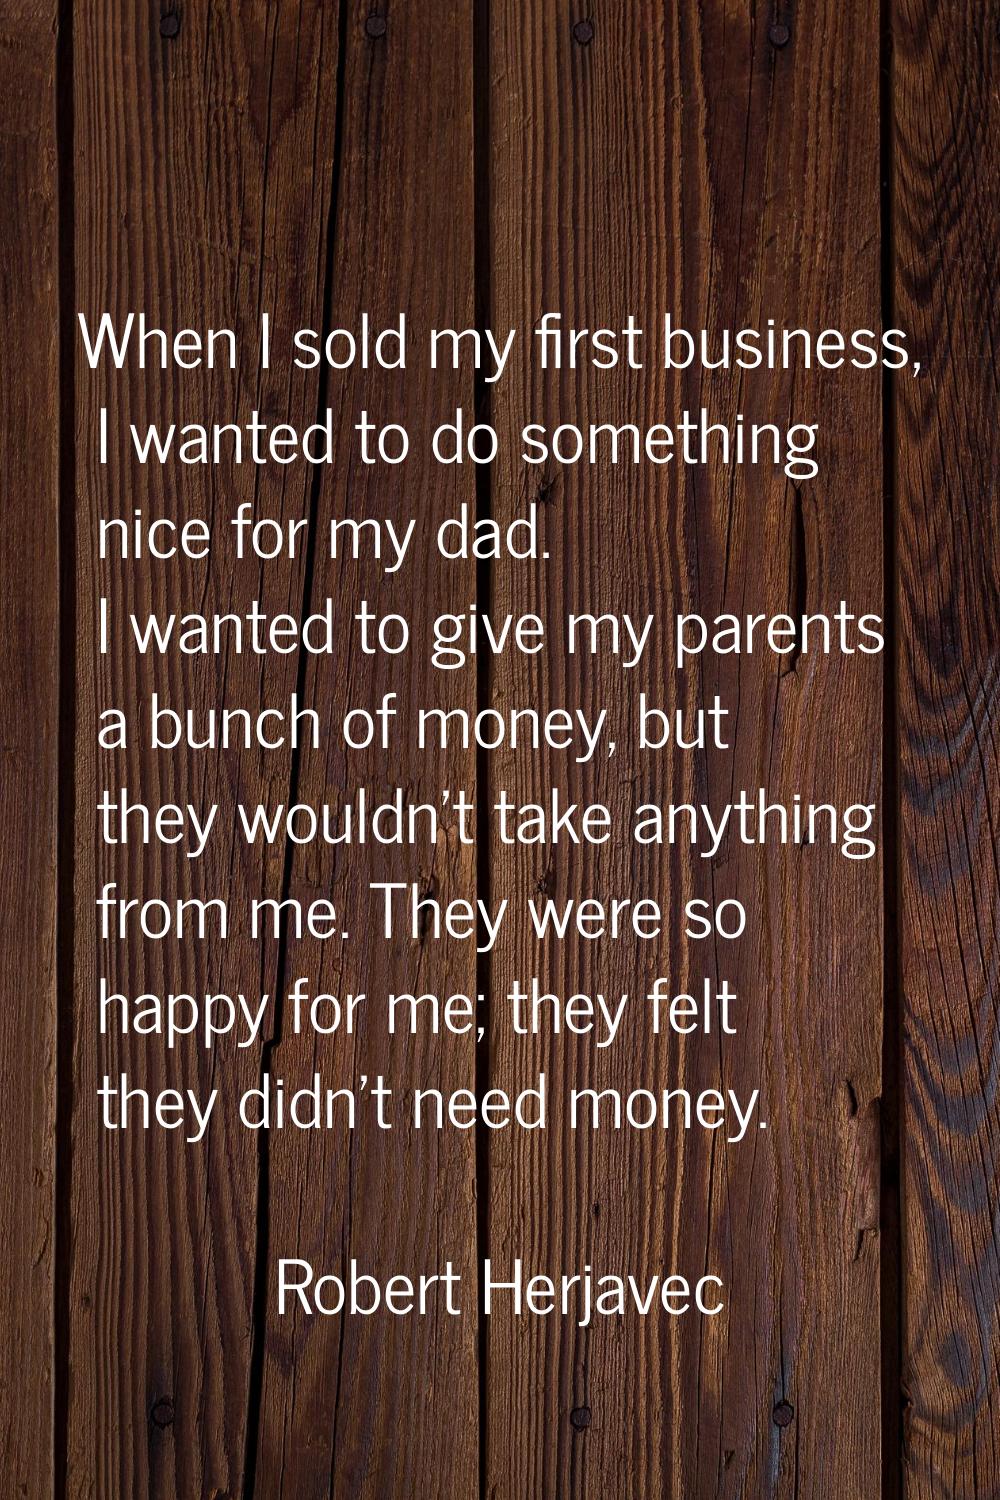 When I sold my first business, I wanted to do something nice for my dad. I wanted to give my parent